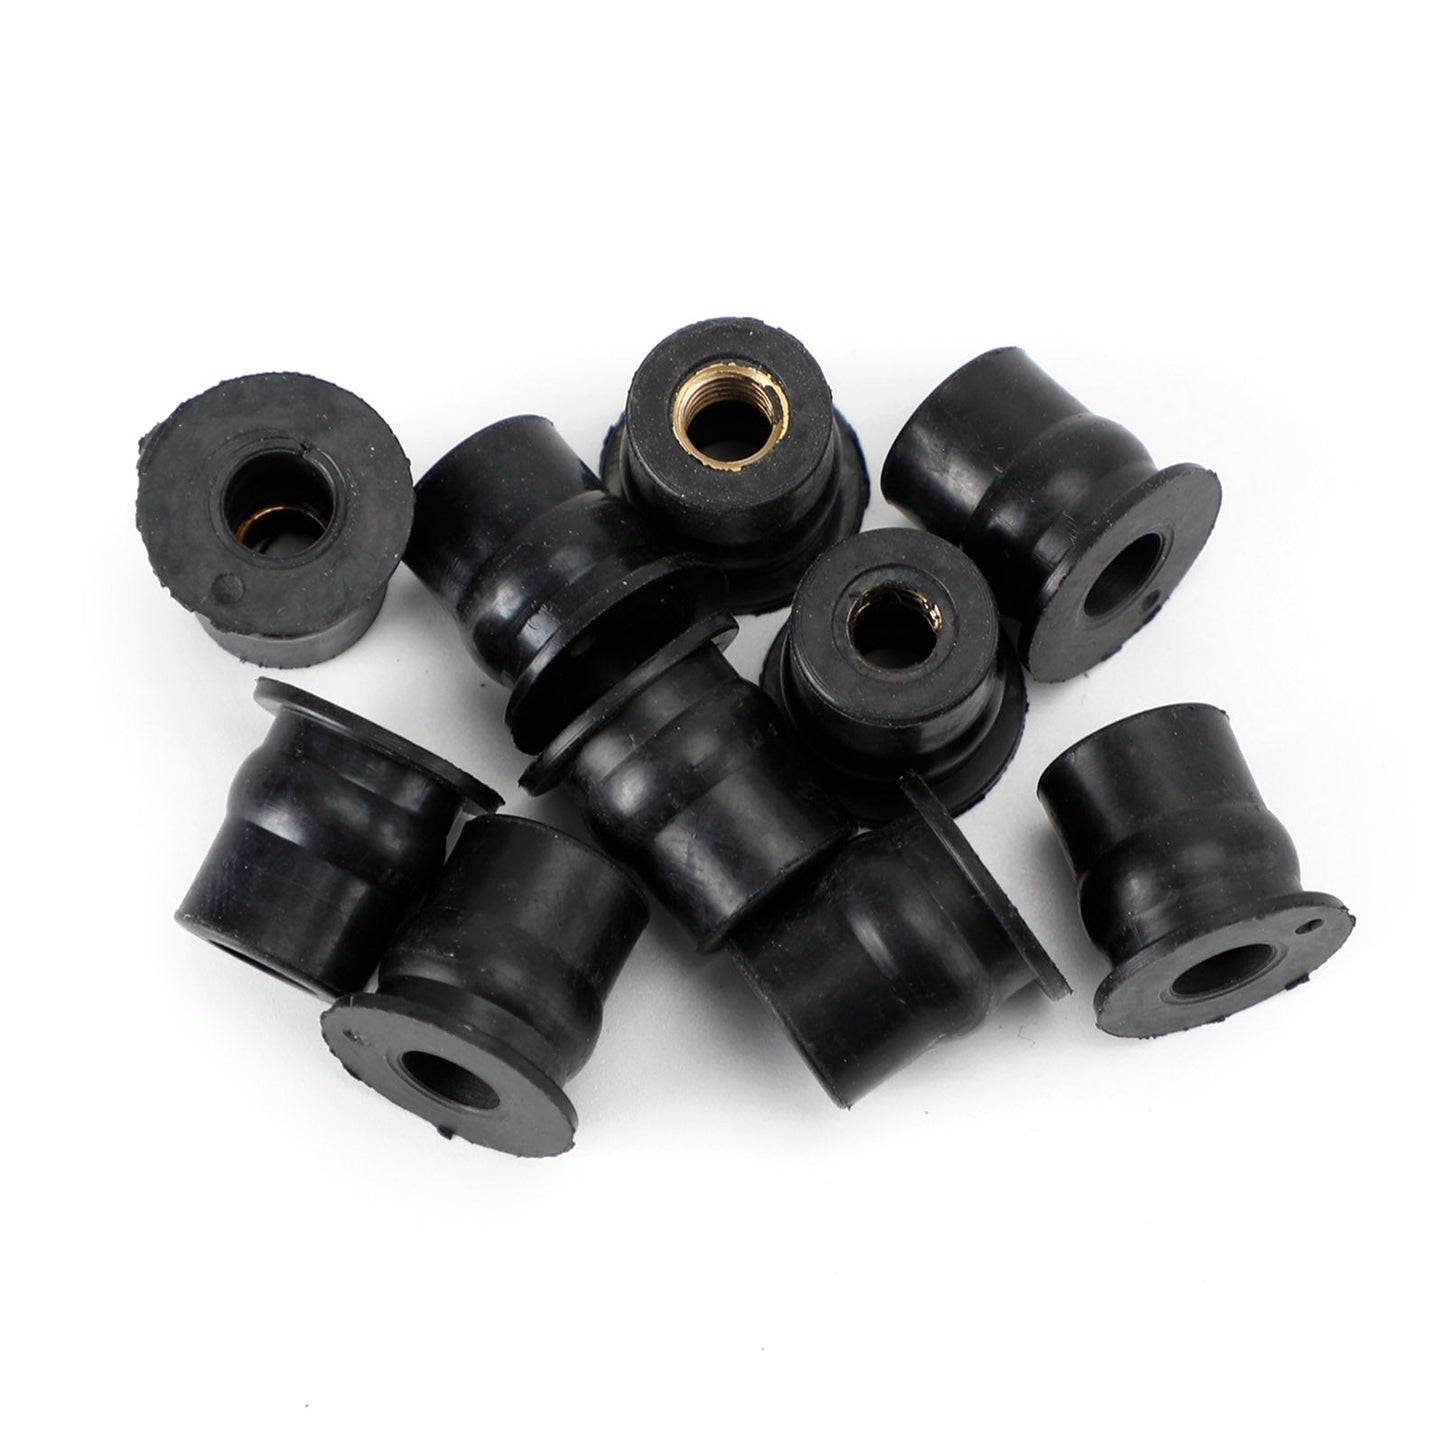 M6 Rubber Well Nuts Wellnuts for Fairing & Screen Fixing Pack of 10 - 13mm Hole